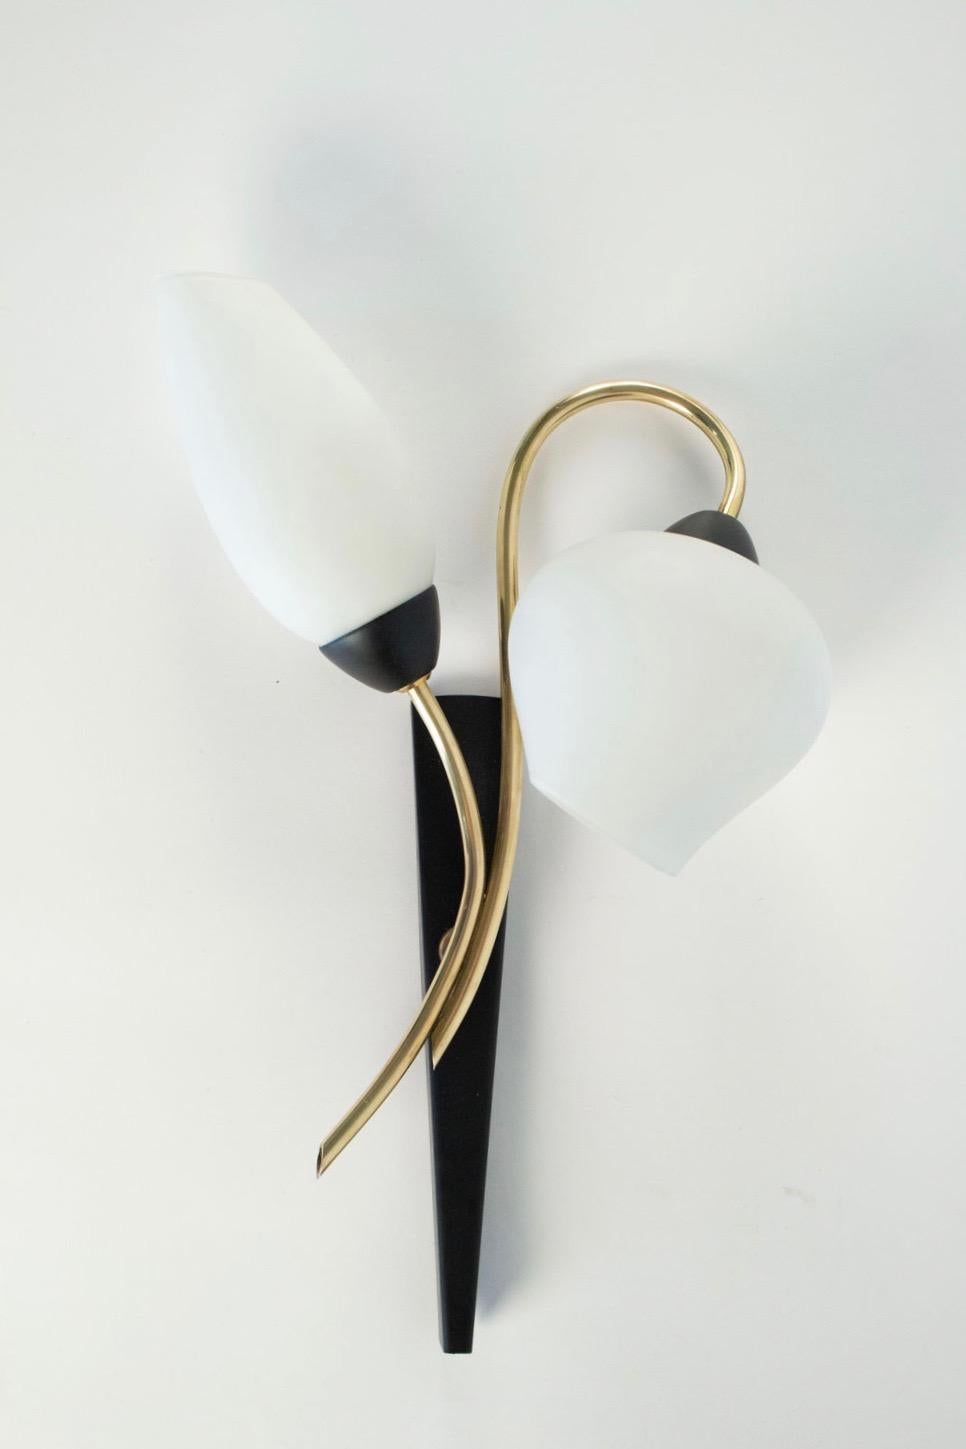 Pair of 1950s sconces by Maison Lunel.
Each sconce consisting of two gilt brass arms of a stylized flower shape surmounted by truncated ovoid opaline glass suggesting the flower button.
The trapeze shape black metal base underlines the piece.
Two